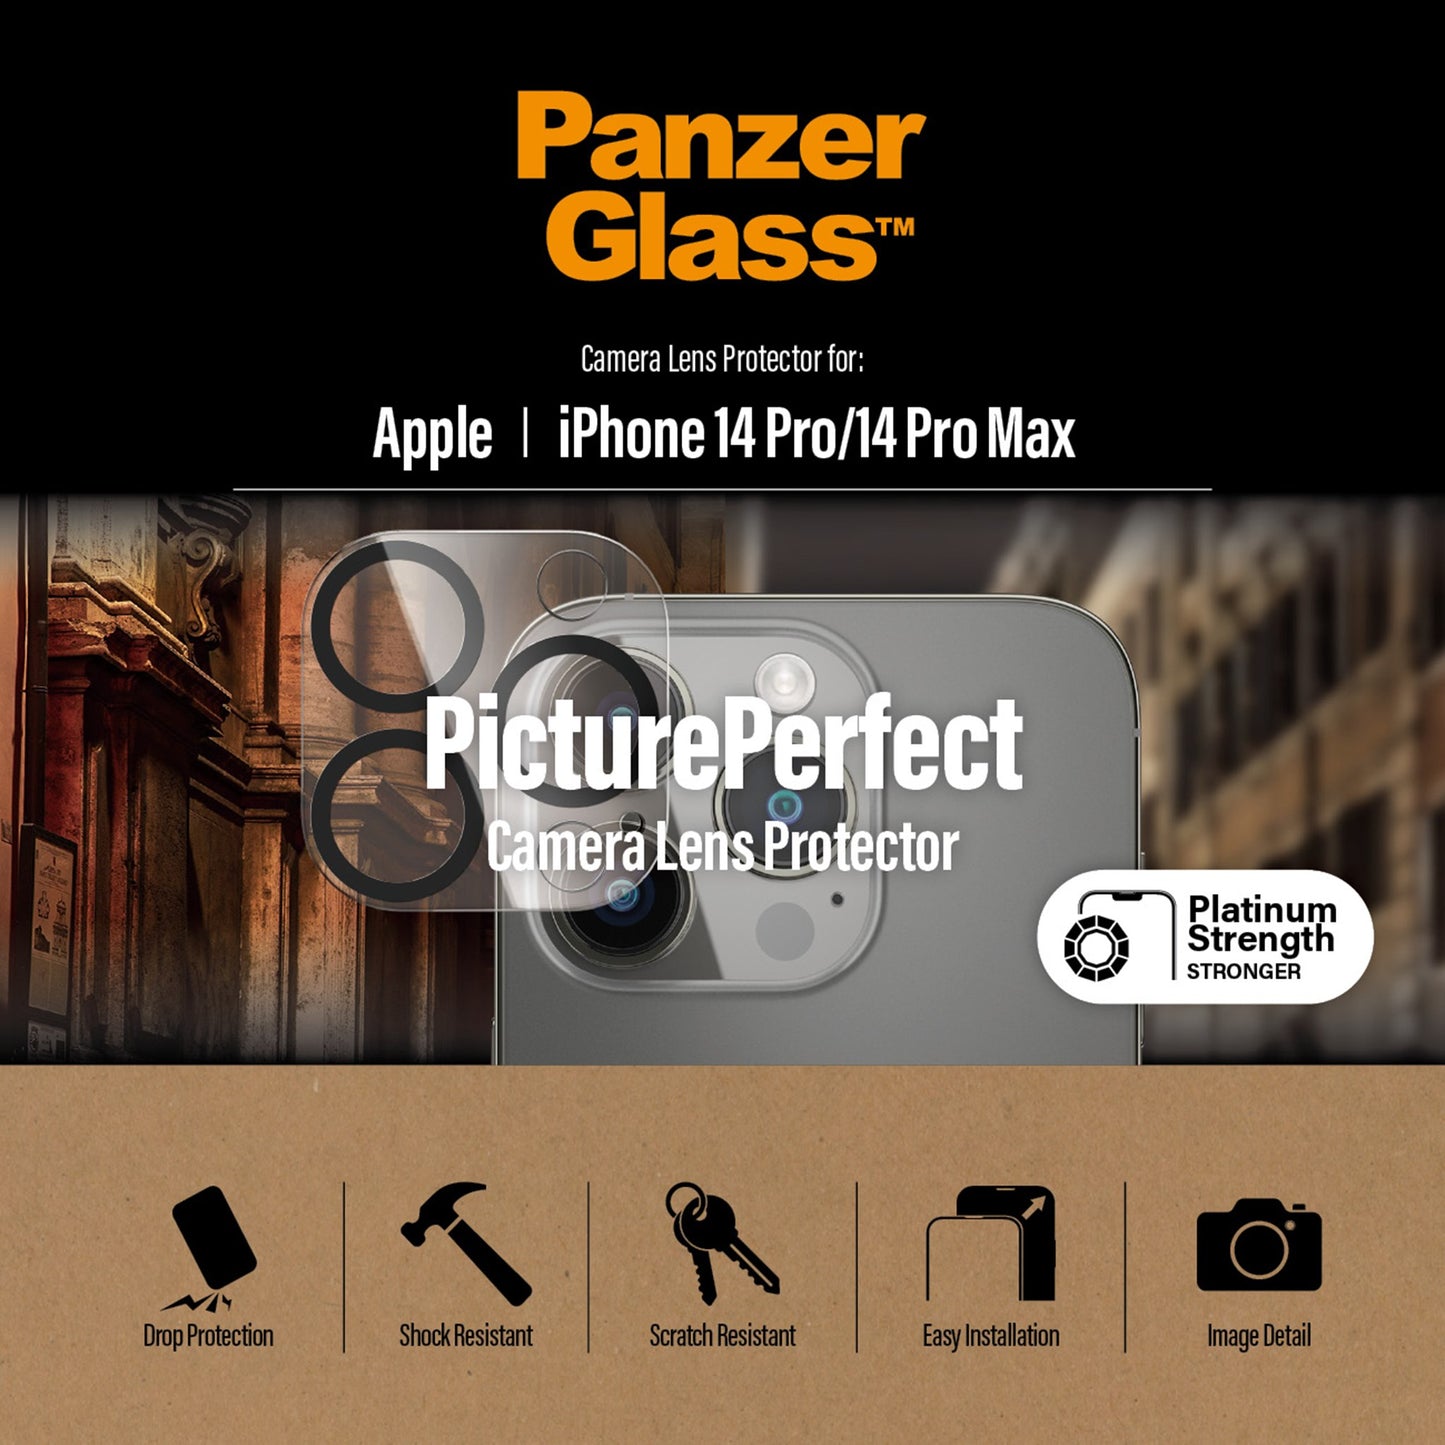 PanzerGlass™ PicturePerfect Camera Lens Protector Apple iPhone 14 Pro | 14 Pro Max 4